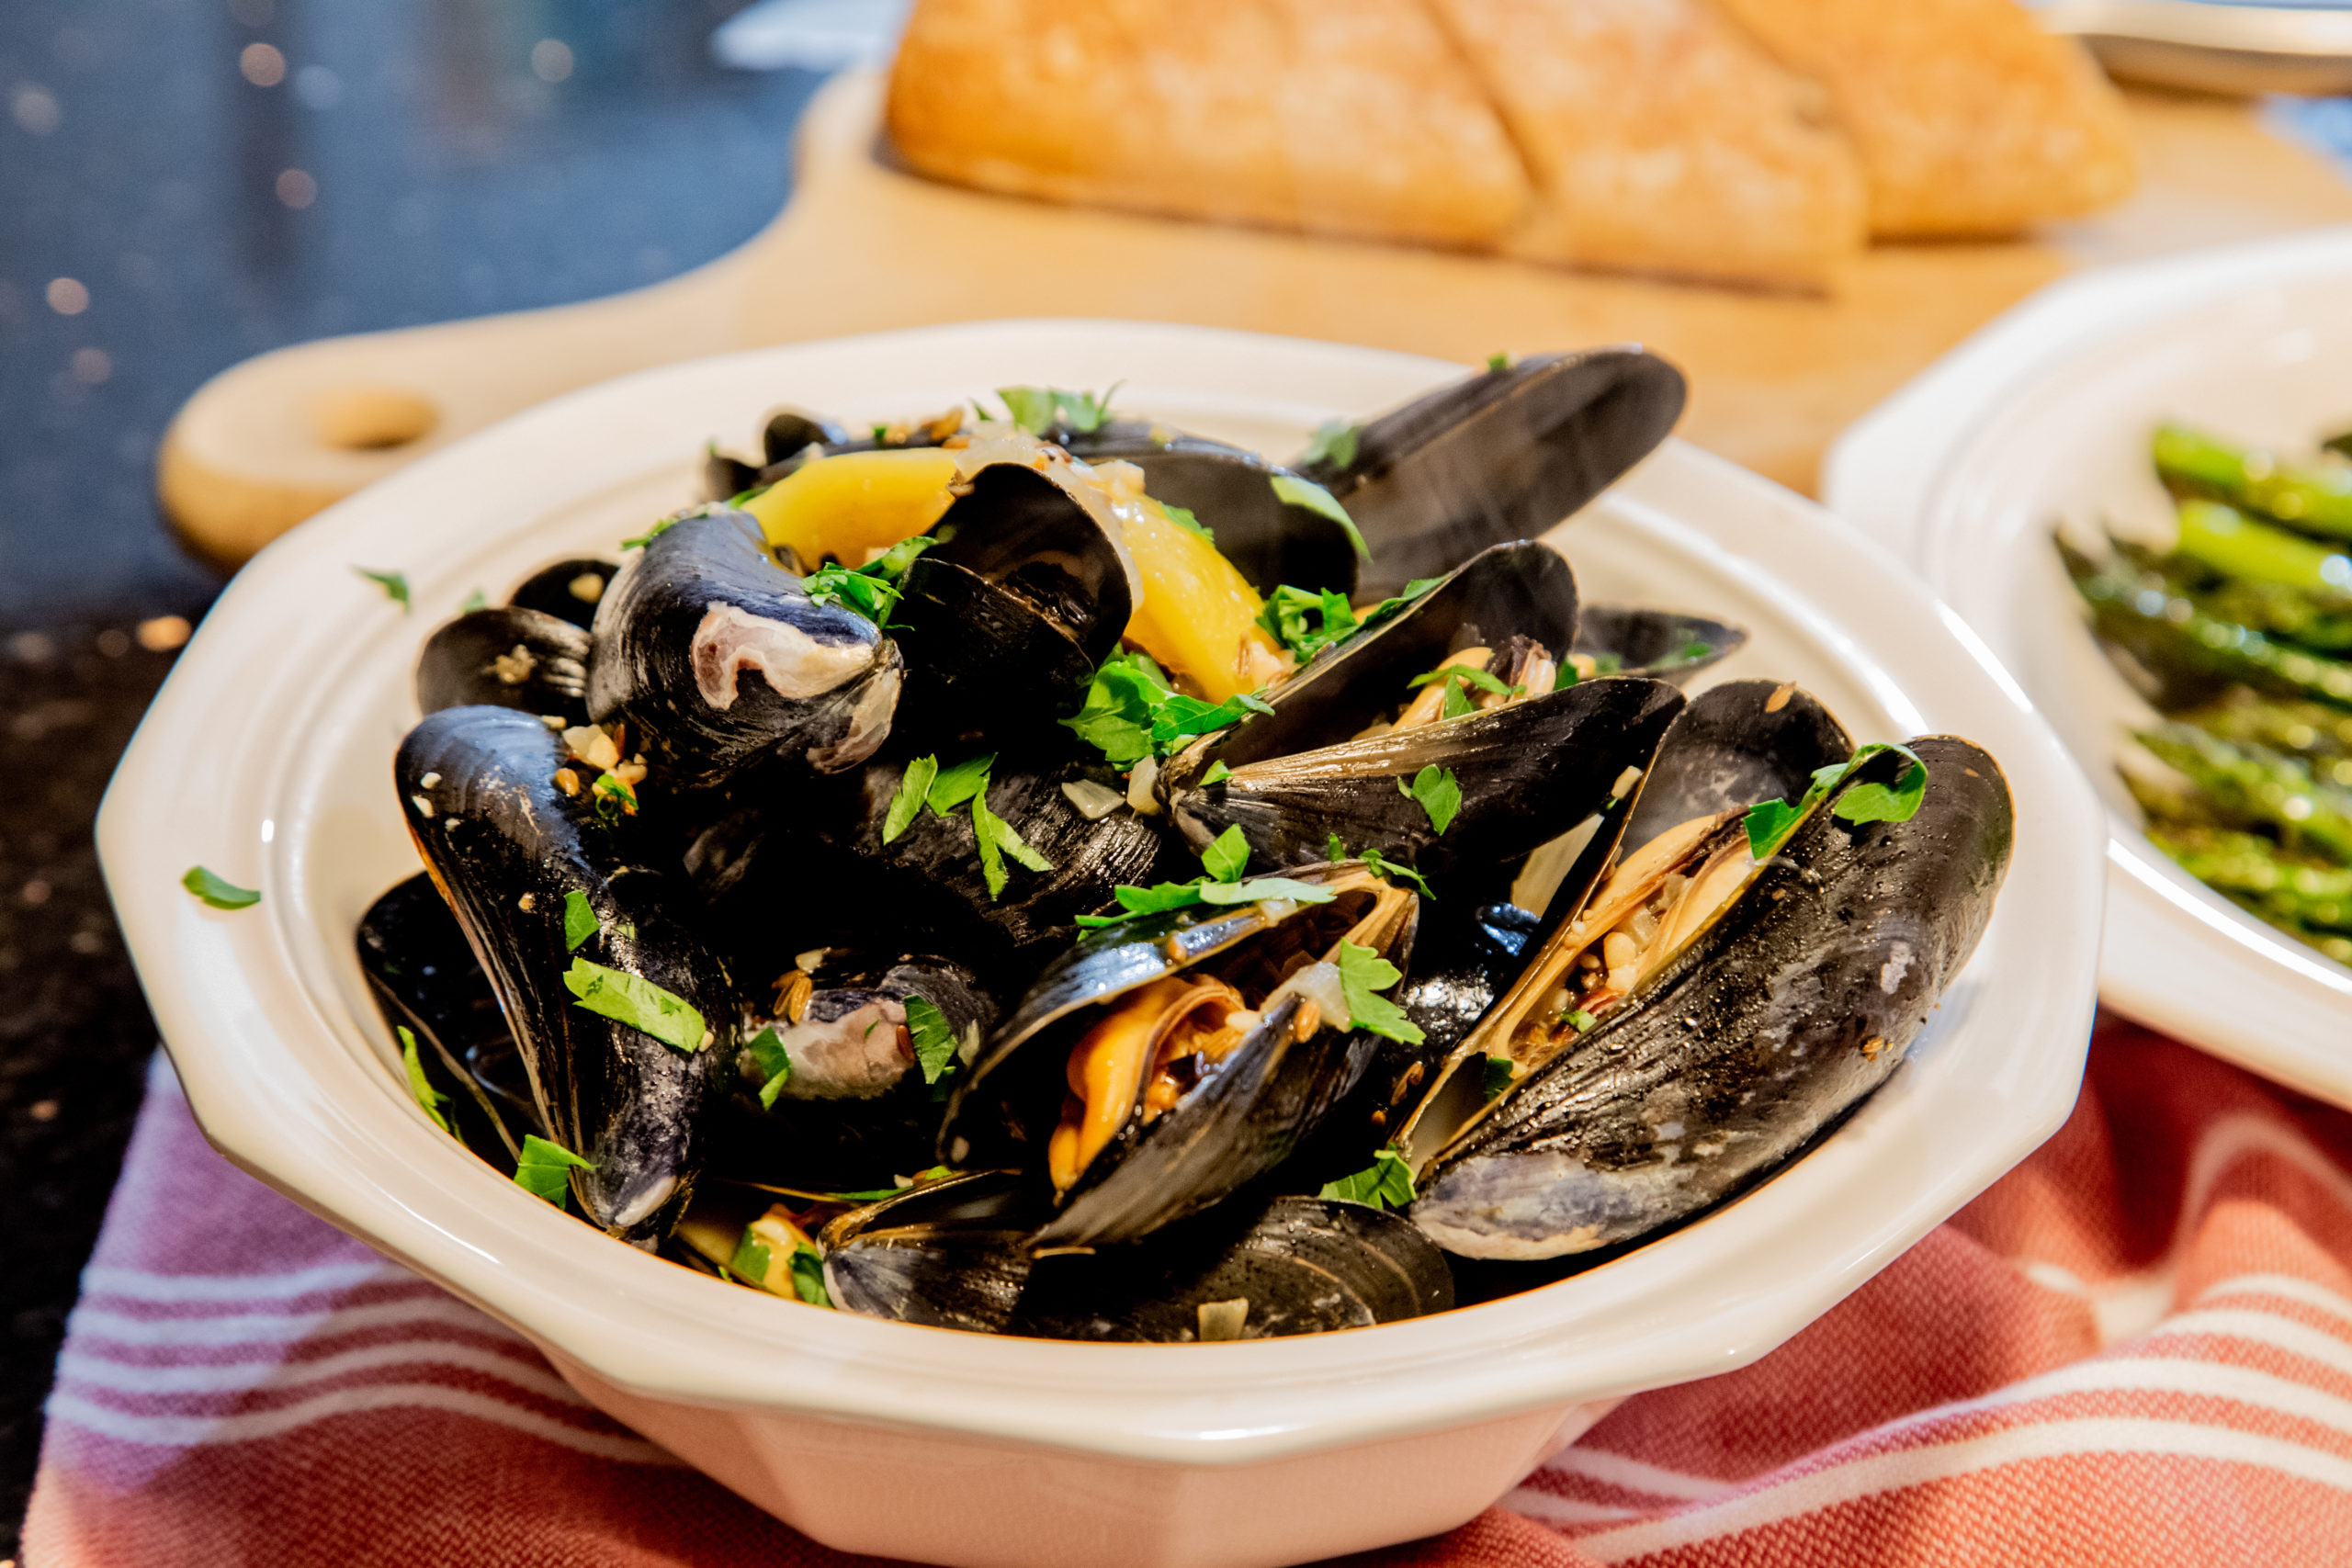 Mussels ready to eat.